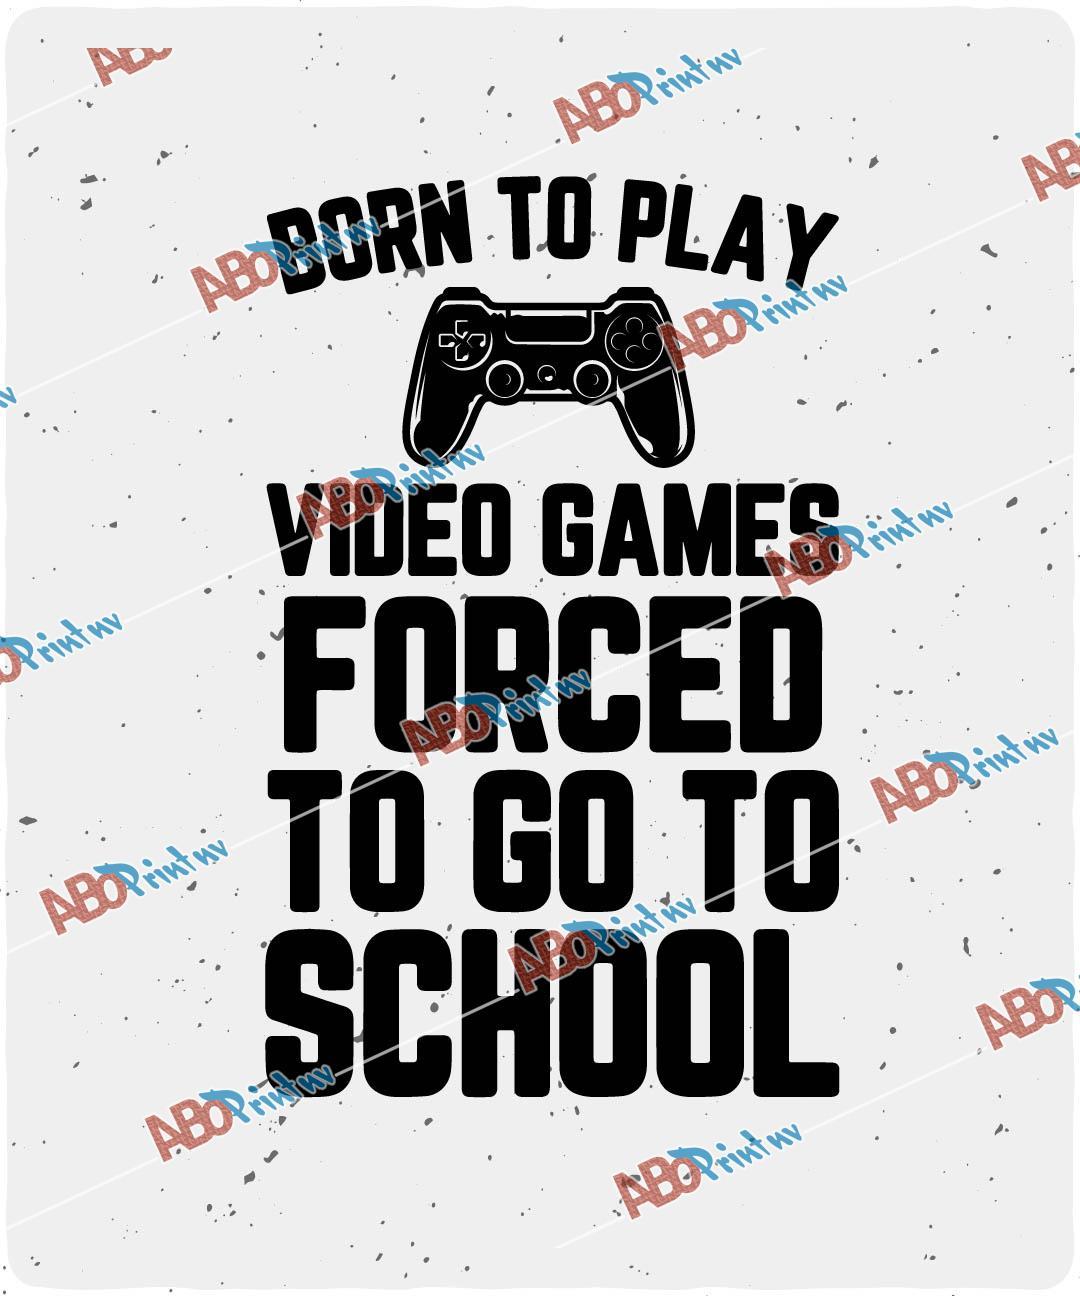 Born to play video games forced to go to school.jpg